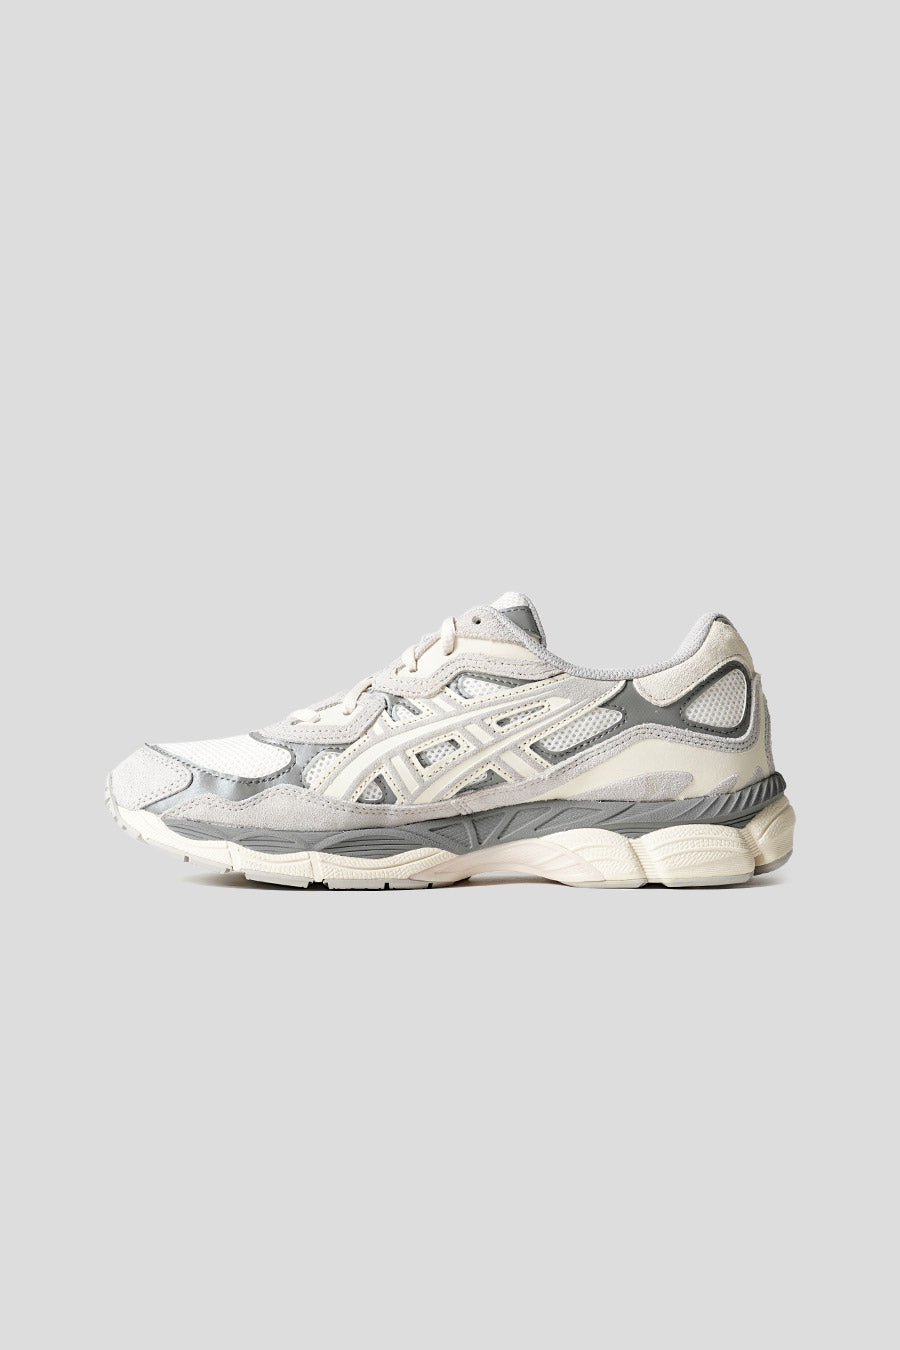 China Great Barrier Reef Temerity Asics - CREAM AND OSTER GREY GEL-NYC SNEAKERS – LE LABO STORE